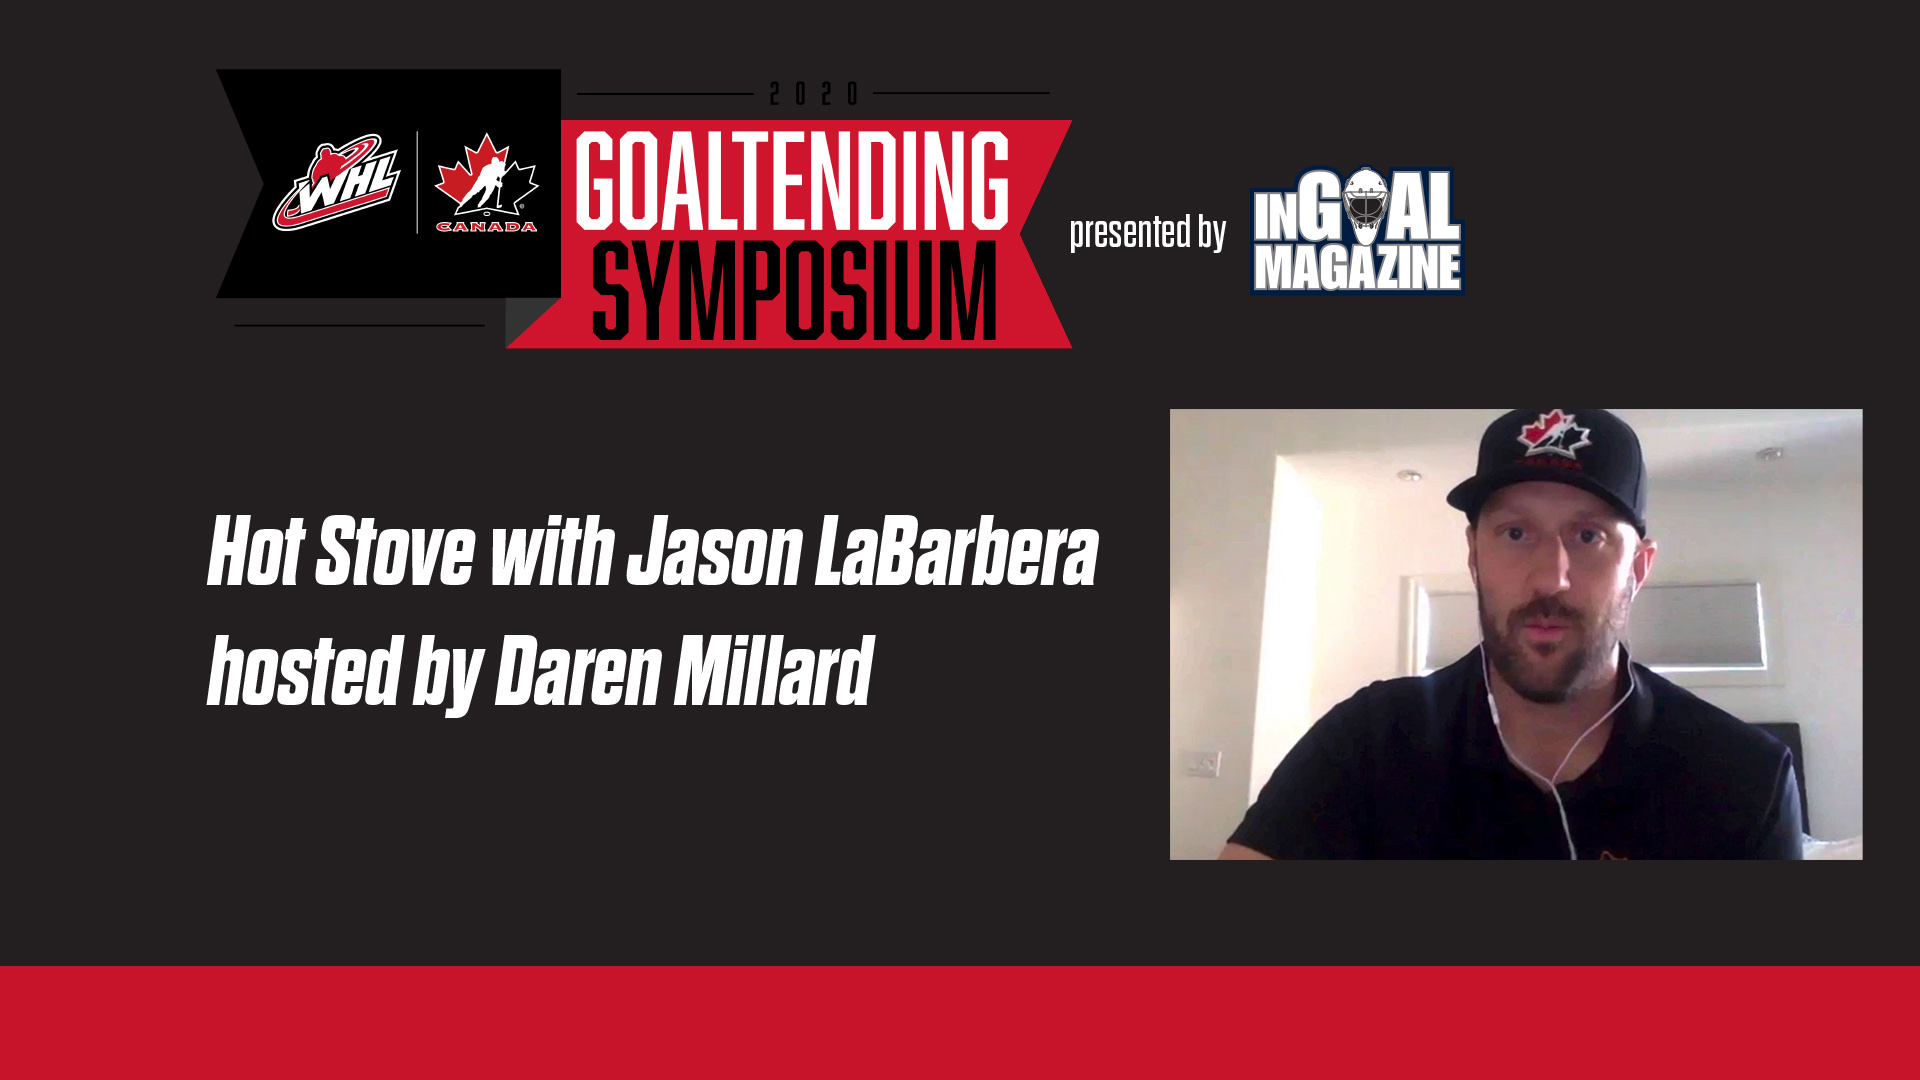 Exclusive Jason Labarbera Hot Stove Interview from the 2020 WHL / Hockey Canada Goaltending Symposium